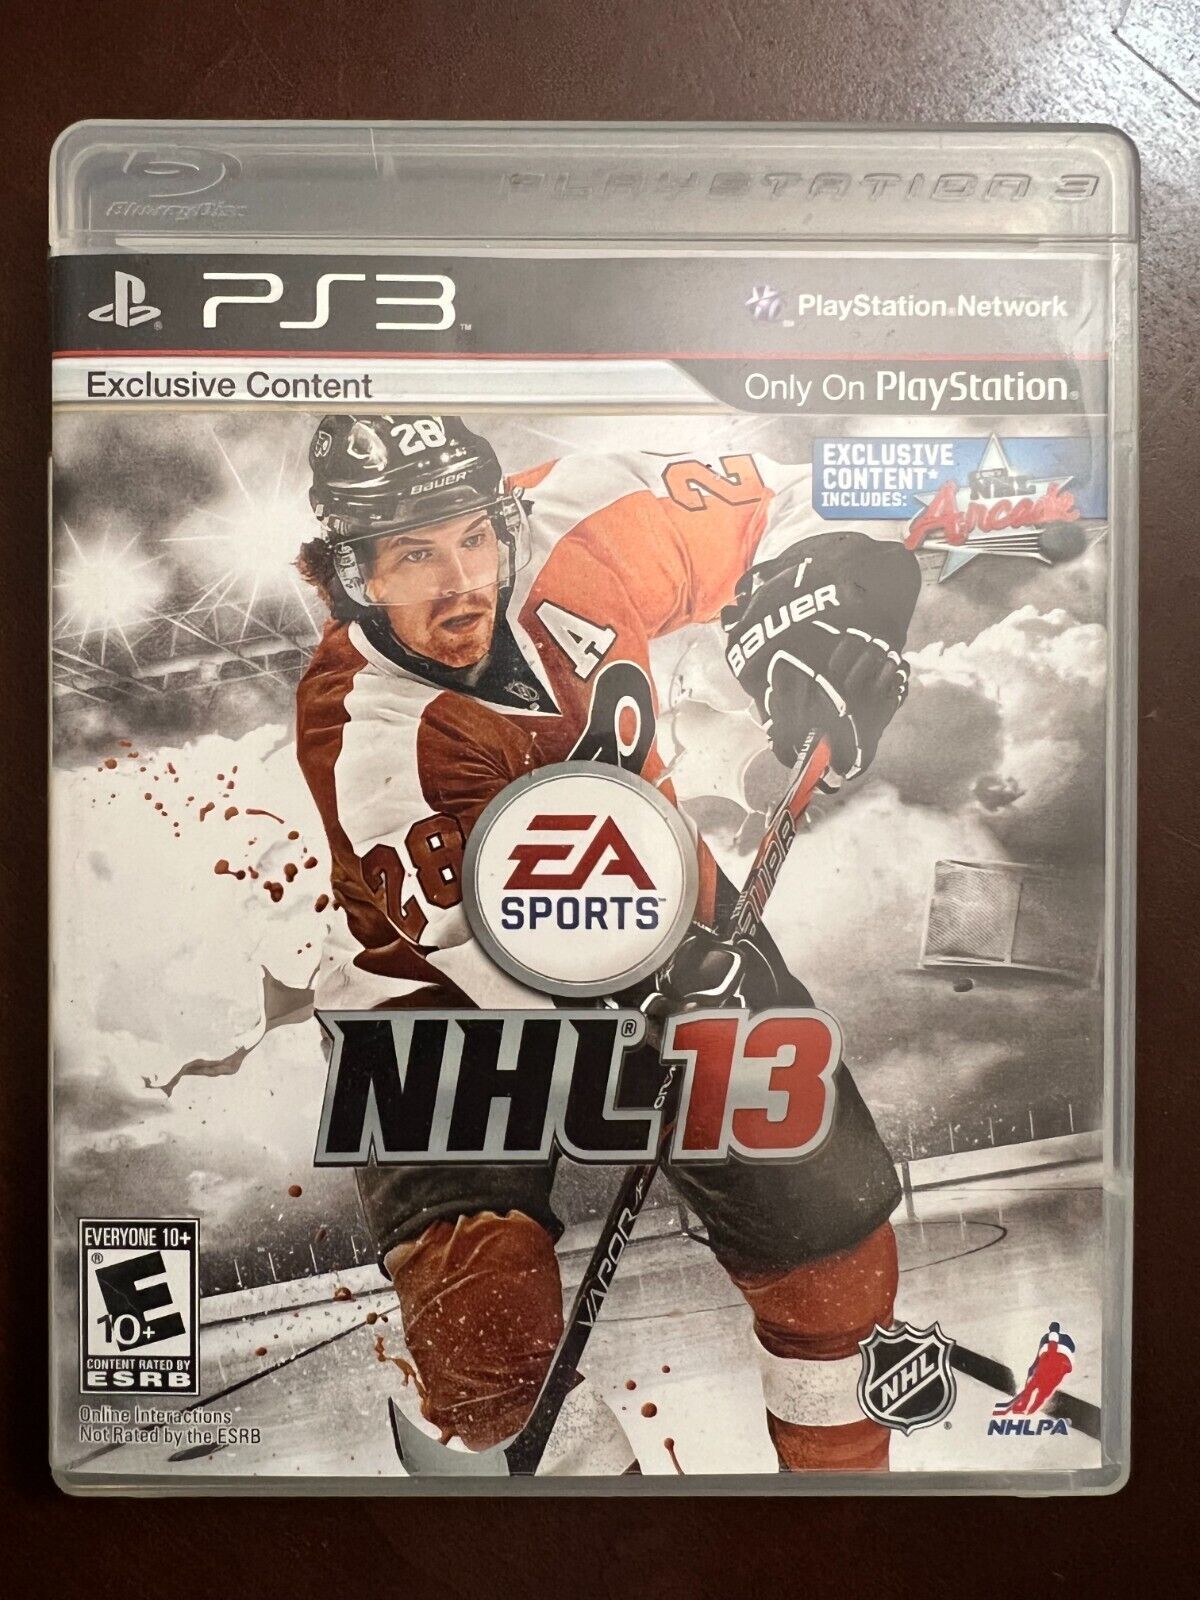 Primary image for NHL 13 Sony PlayStation 3 PS3 EA Sports with Exclusive Content